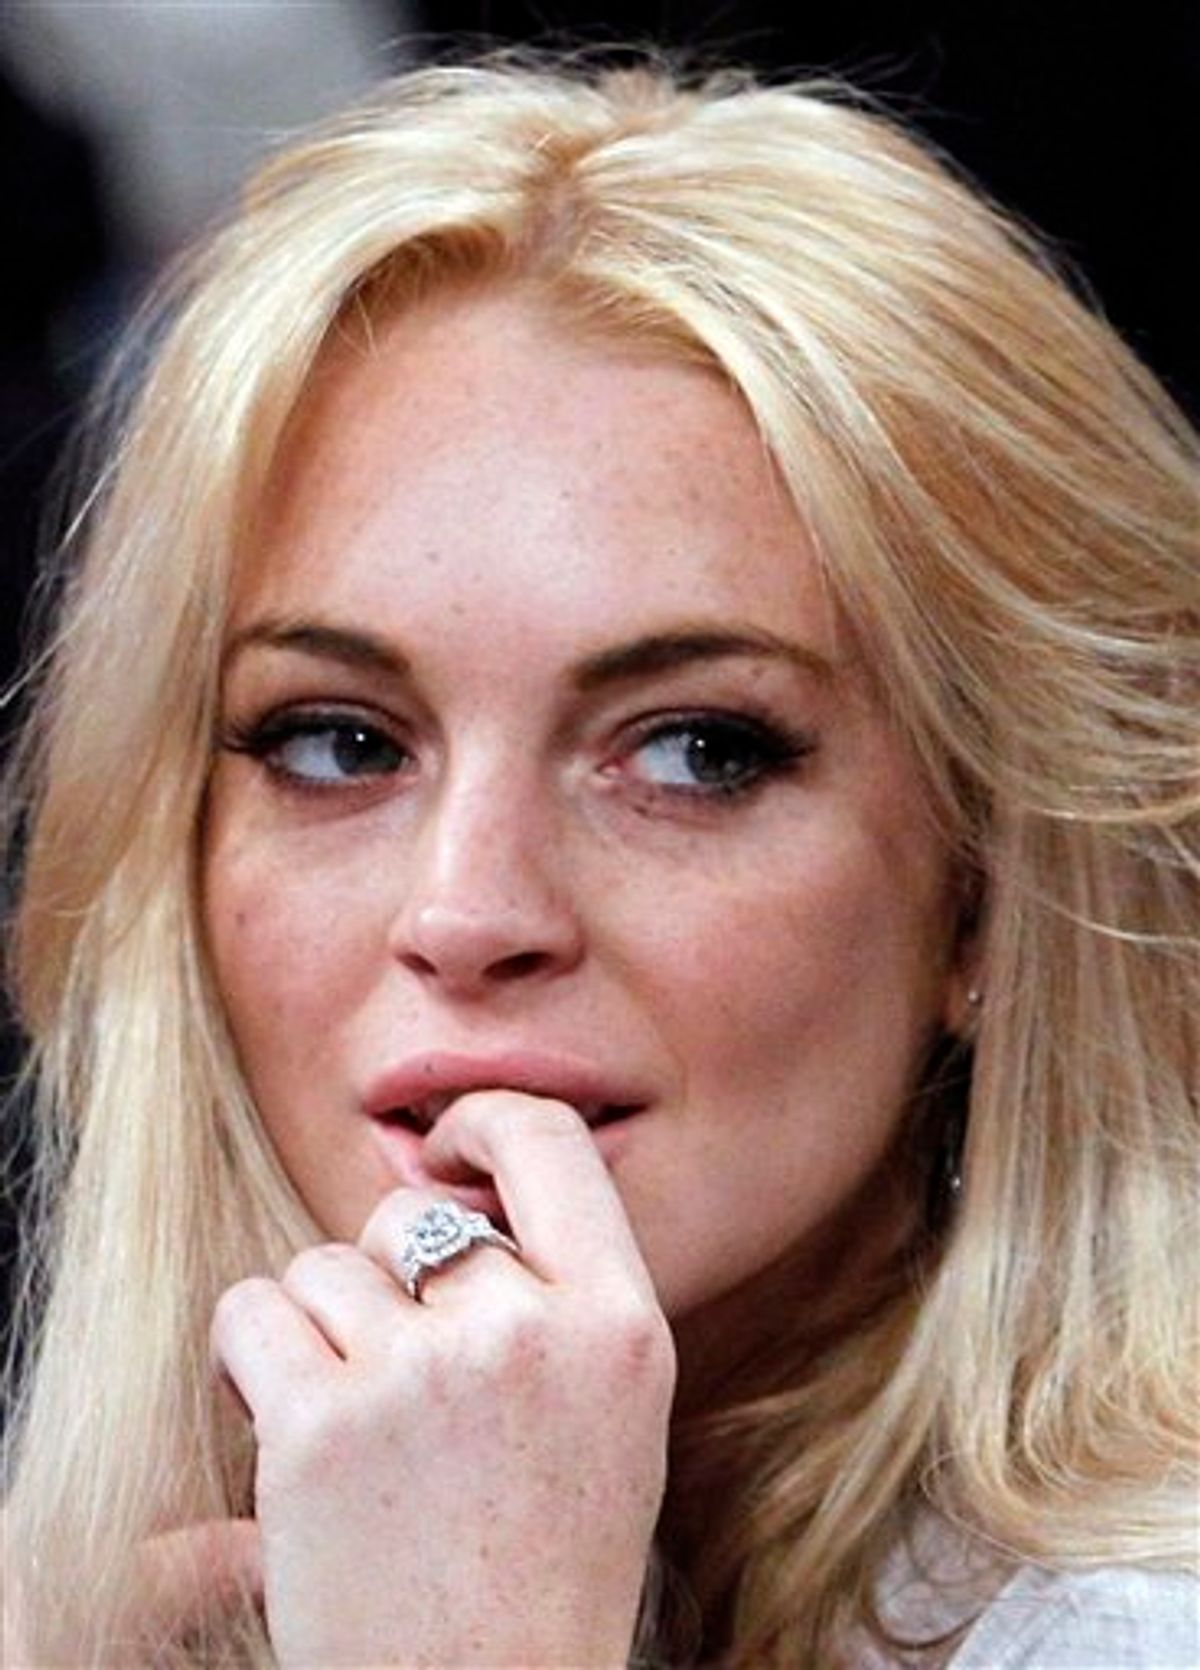 FILE - In this Jan. 9, 2011 file photo, Lindsay Lohan attends the Los Angeles Lakers New York Knicks NBA basketball game in Los Angeles. (AP Photo/Alex Gallardo, File) (AP)